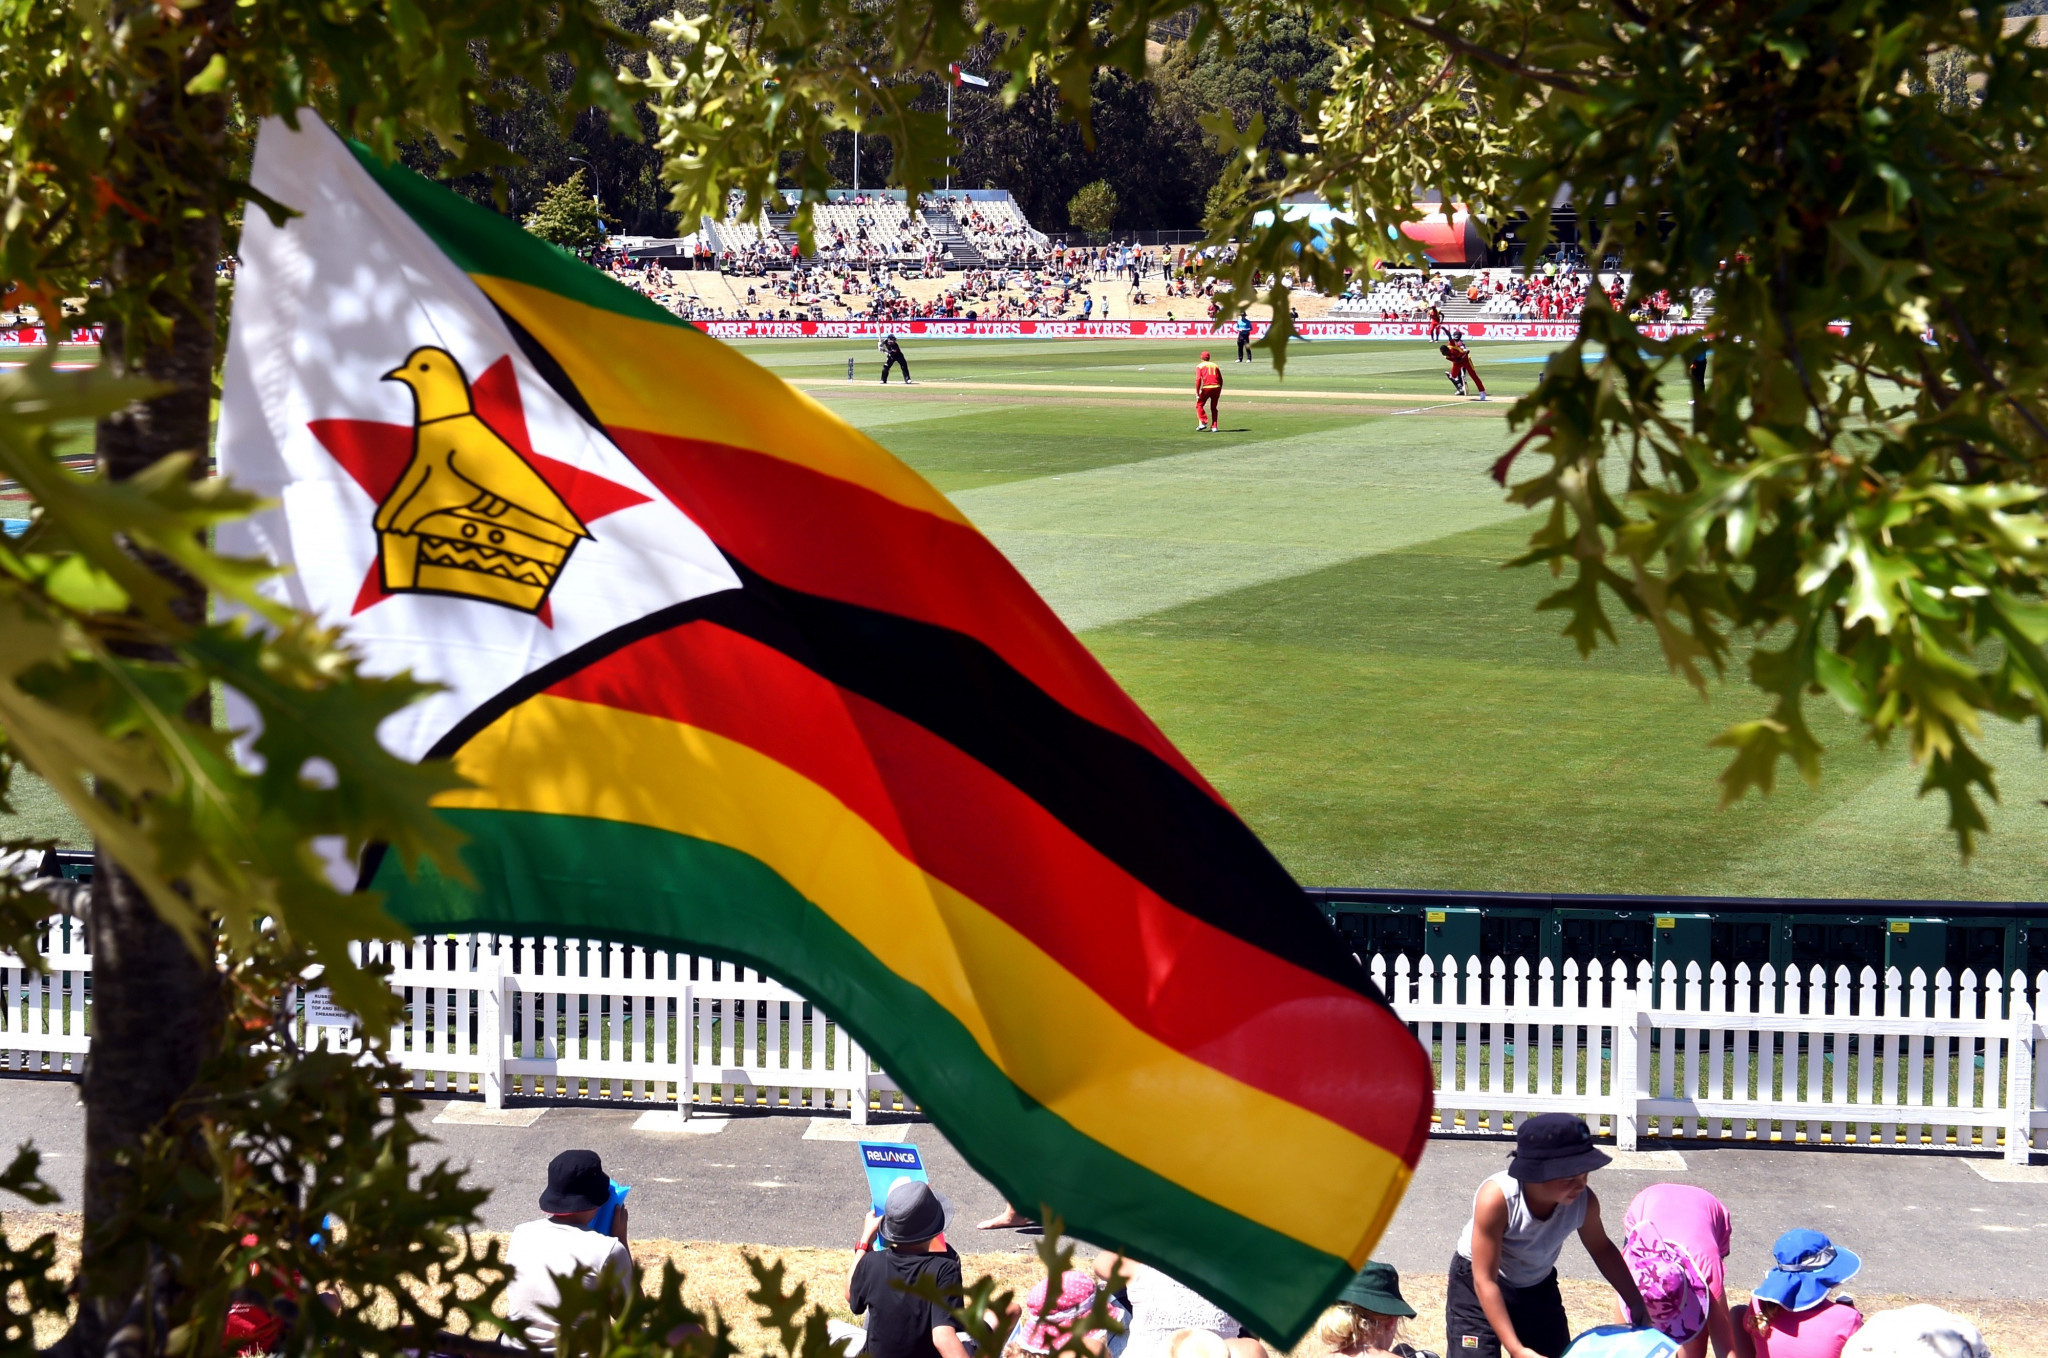 Zimbabwe has not won a Paralympic medal since 2004 ©Getty Images